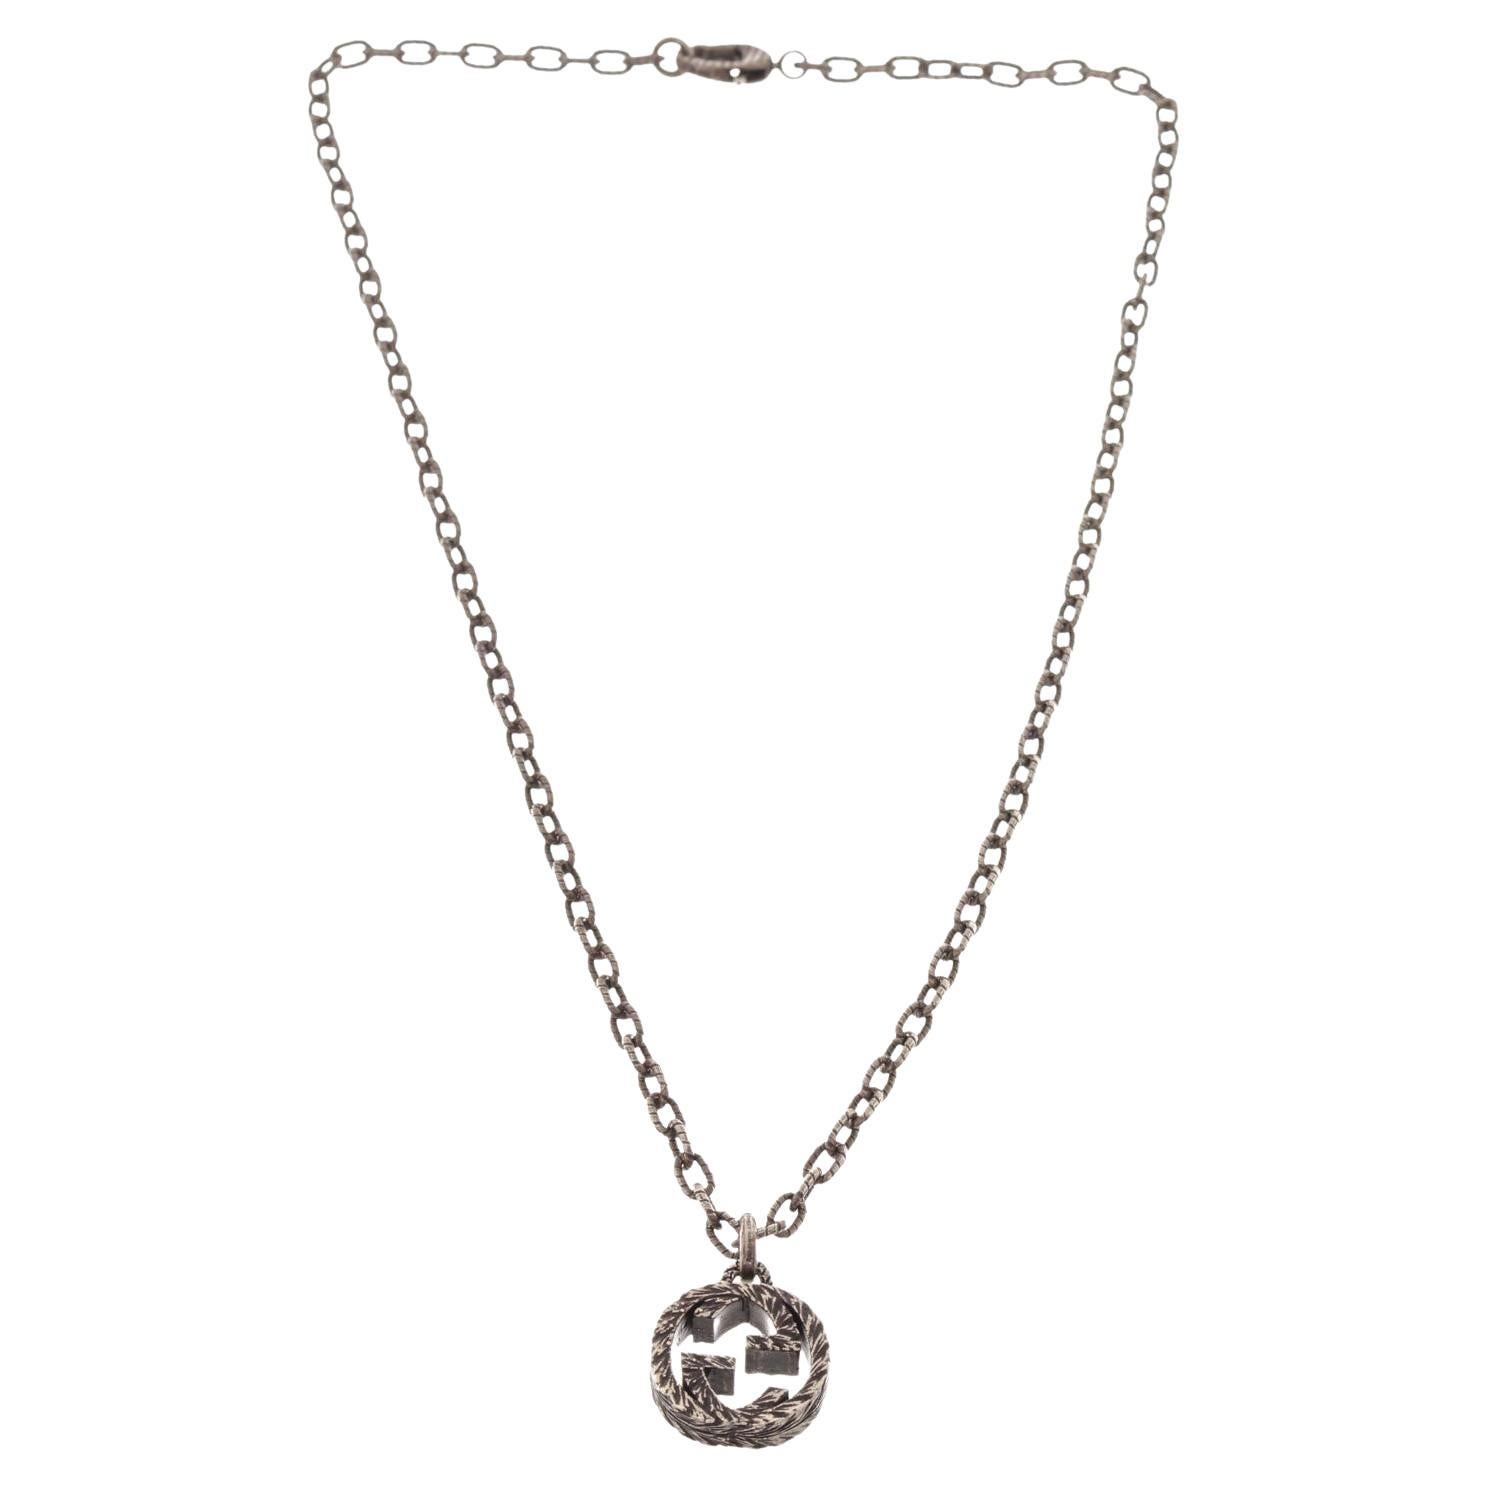 Gucci Silver Interlocking G Necklace with Silver-Tone Hardware For Sale ...